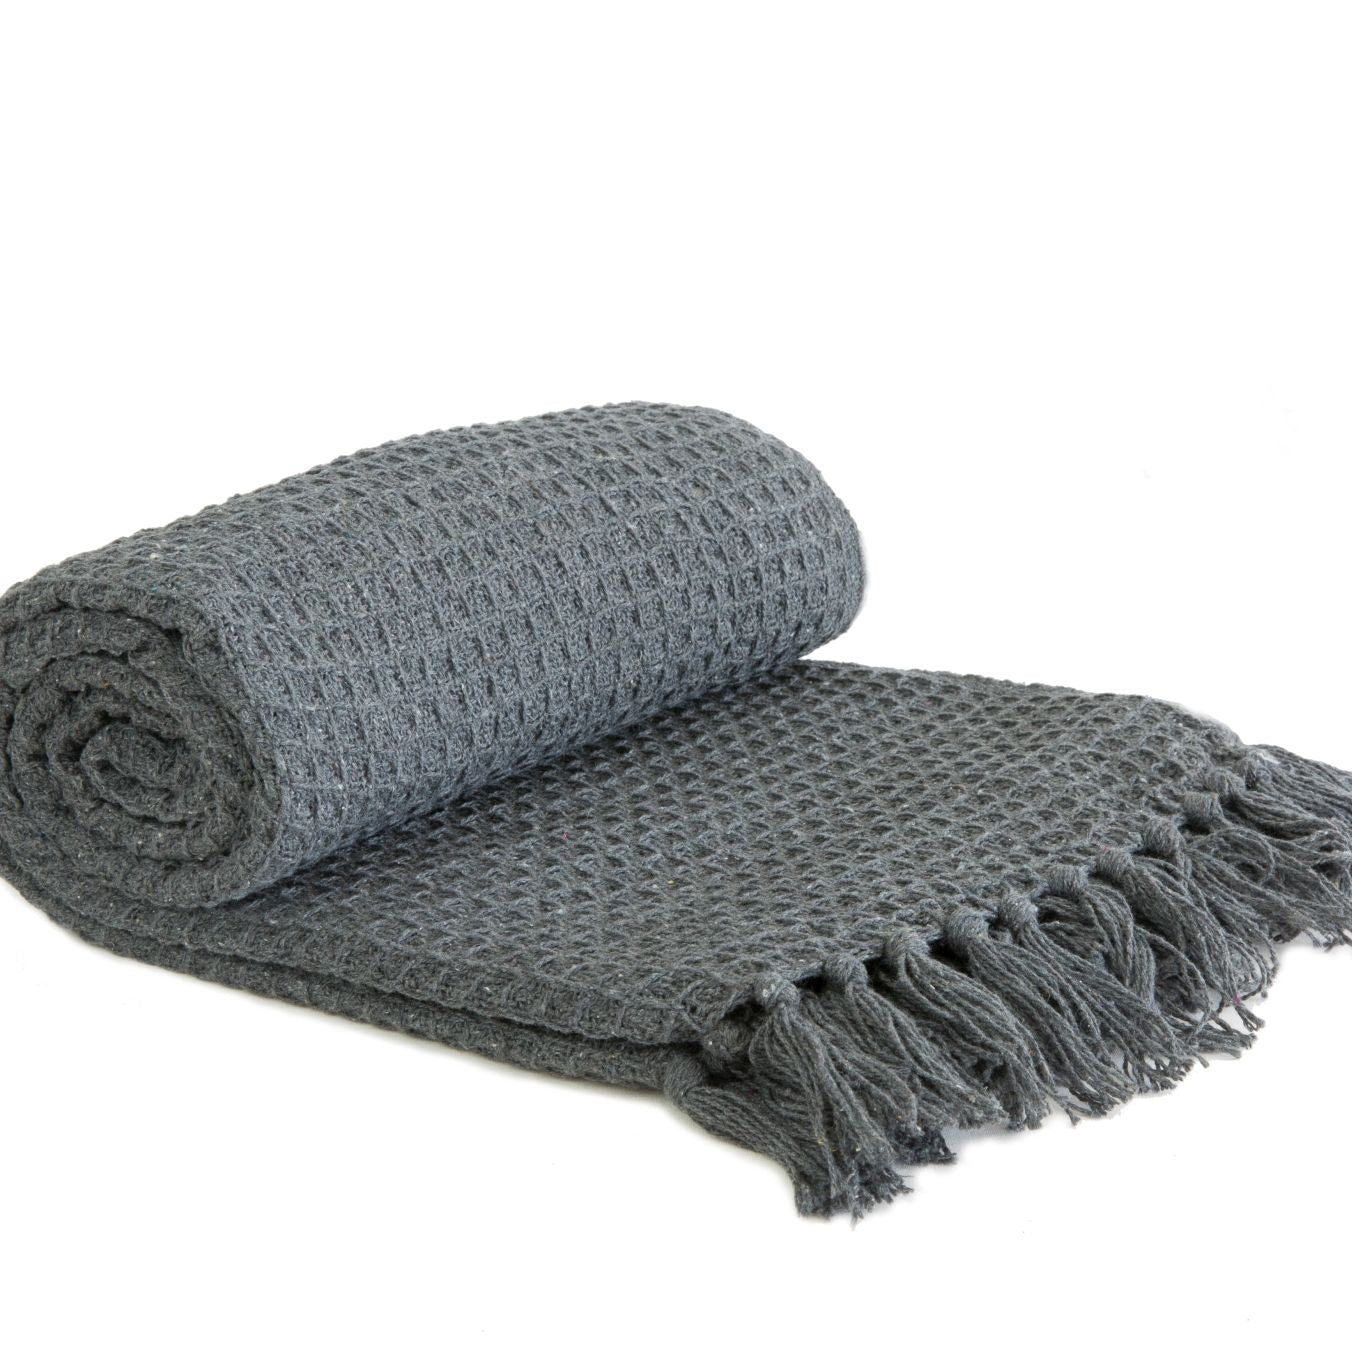 Charcoal Honeycomb Recycled Cotton Throw